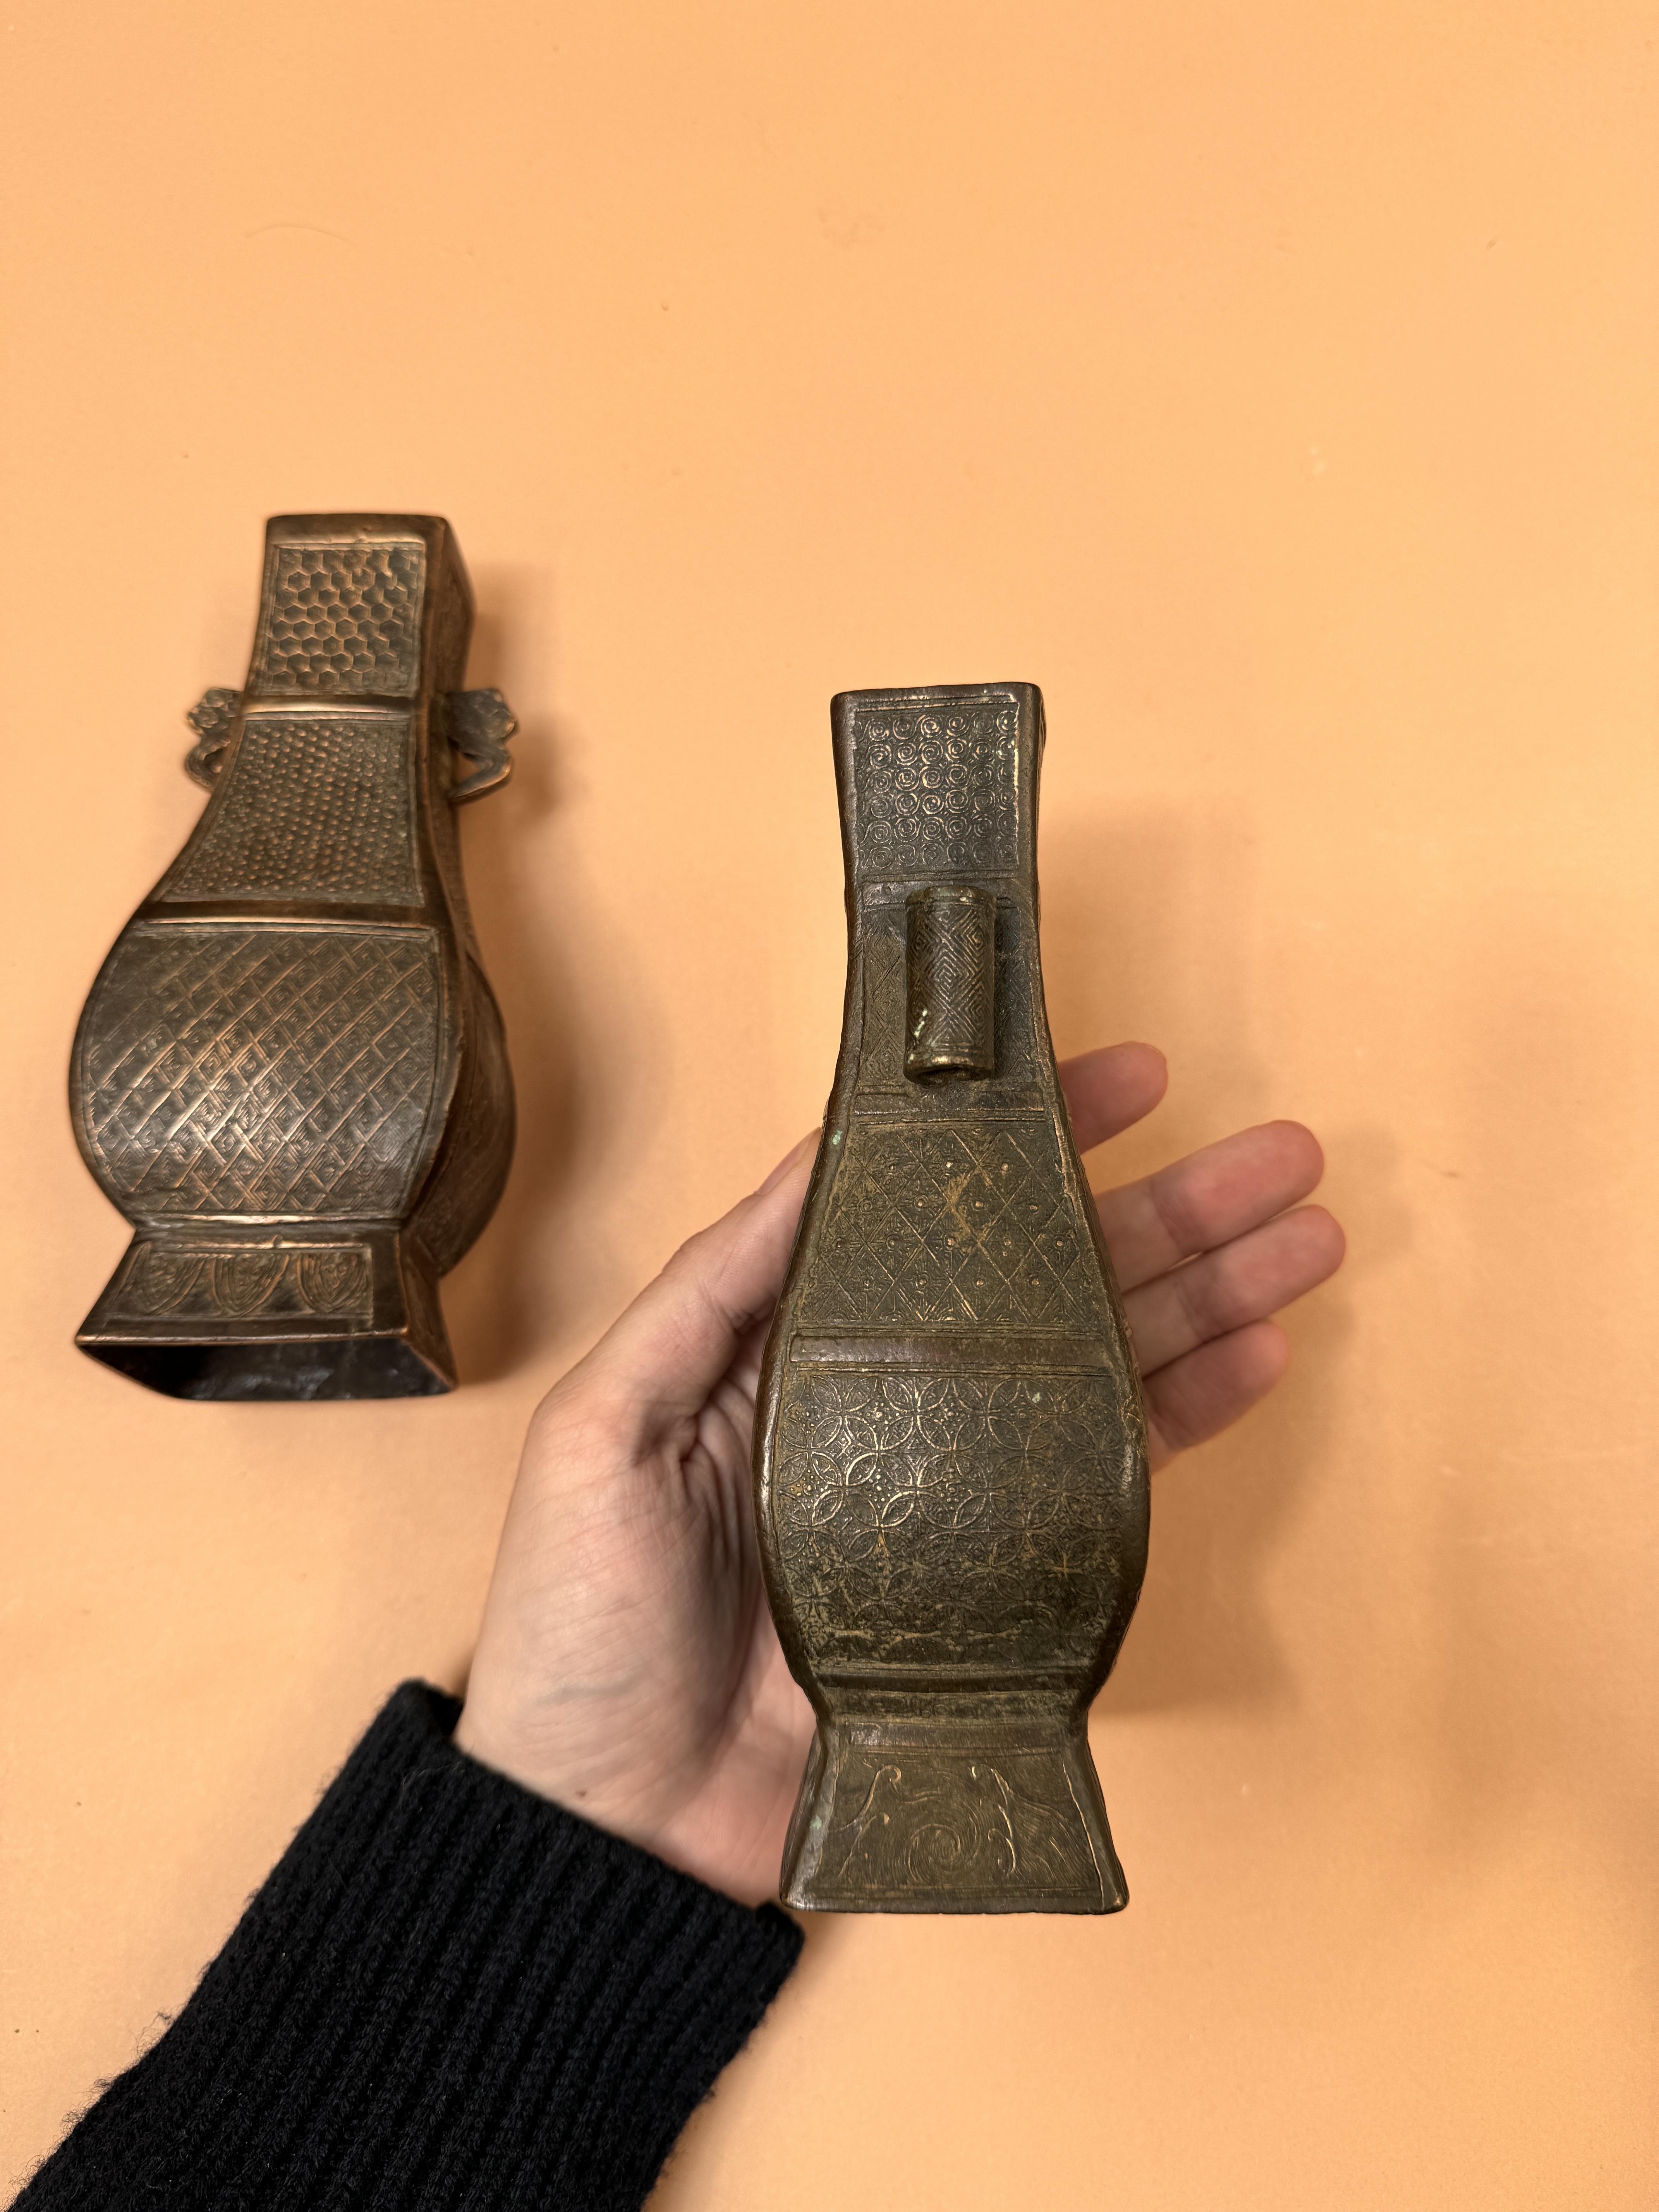 TWO SMALL CHINESE BRONZE ARCHAISTIC VASES 明 銅仿古方壺兩件 - Image 10 of 21